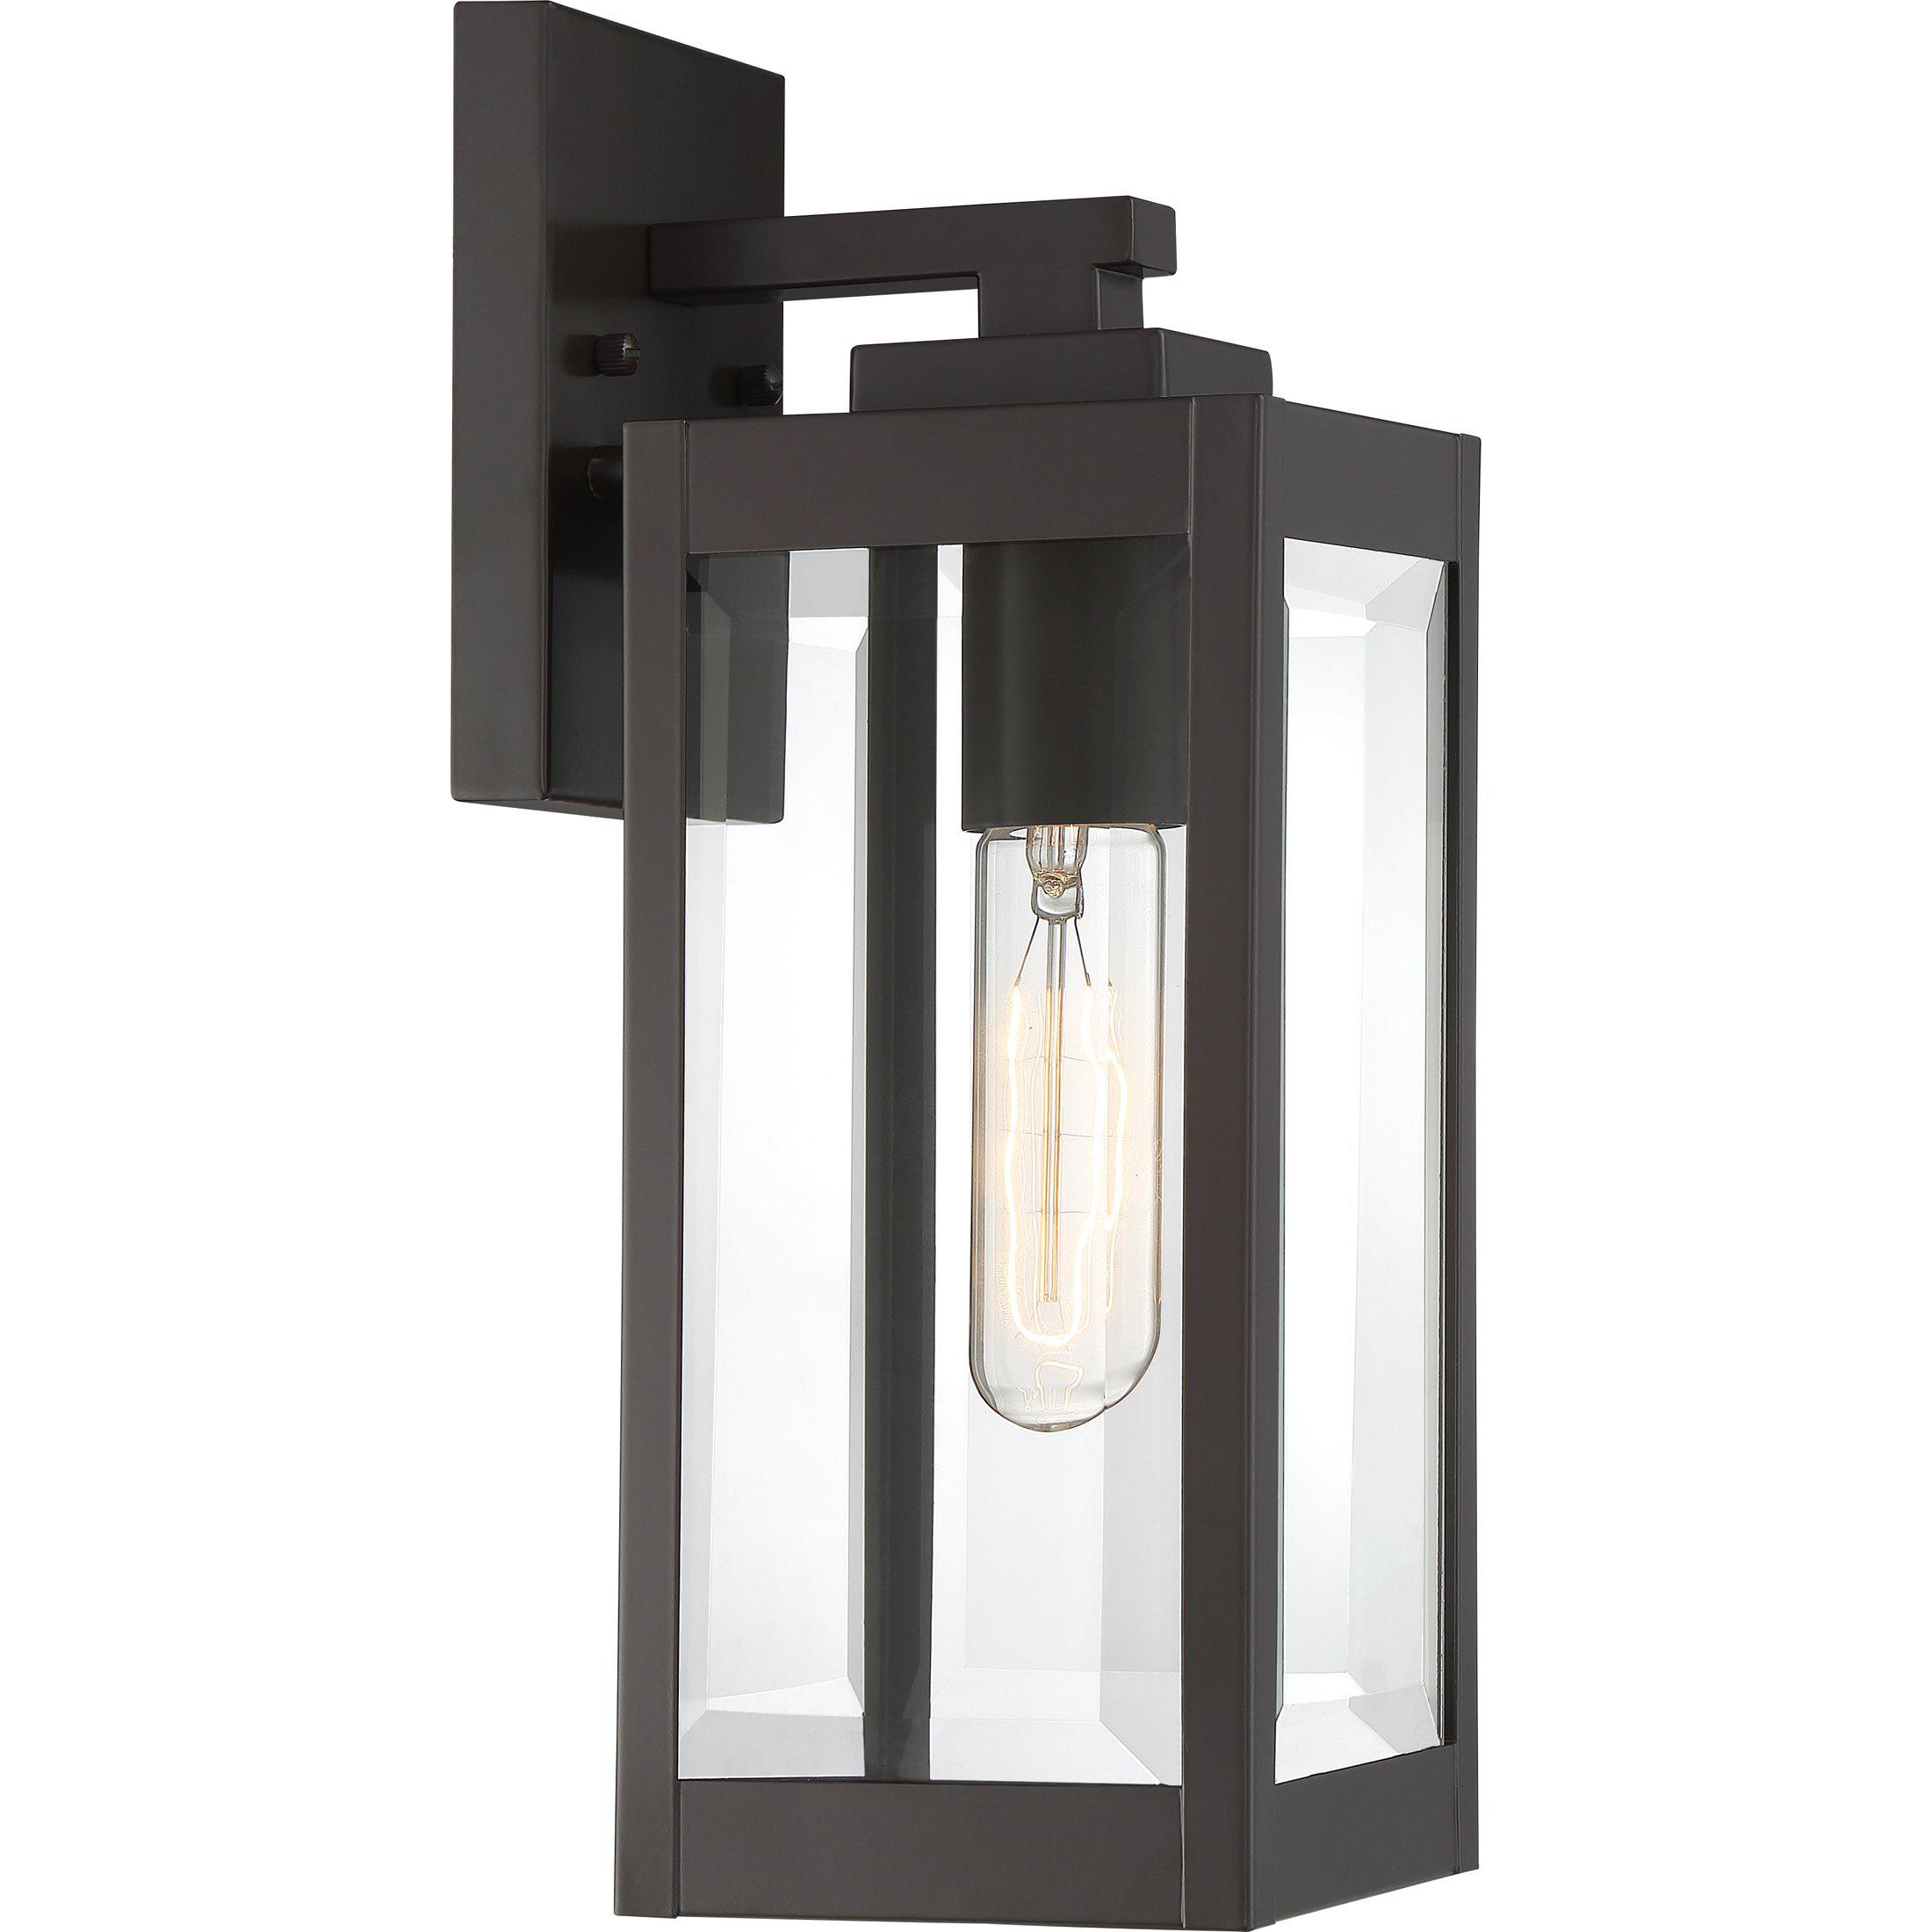 Quoizel  Westover Outdoor Lantern, Small WVR8405 Outdoor l Wall Quoizel Western Bronze  